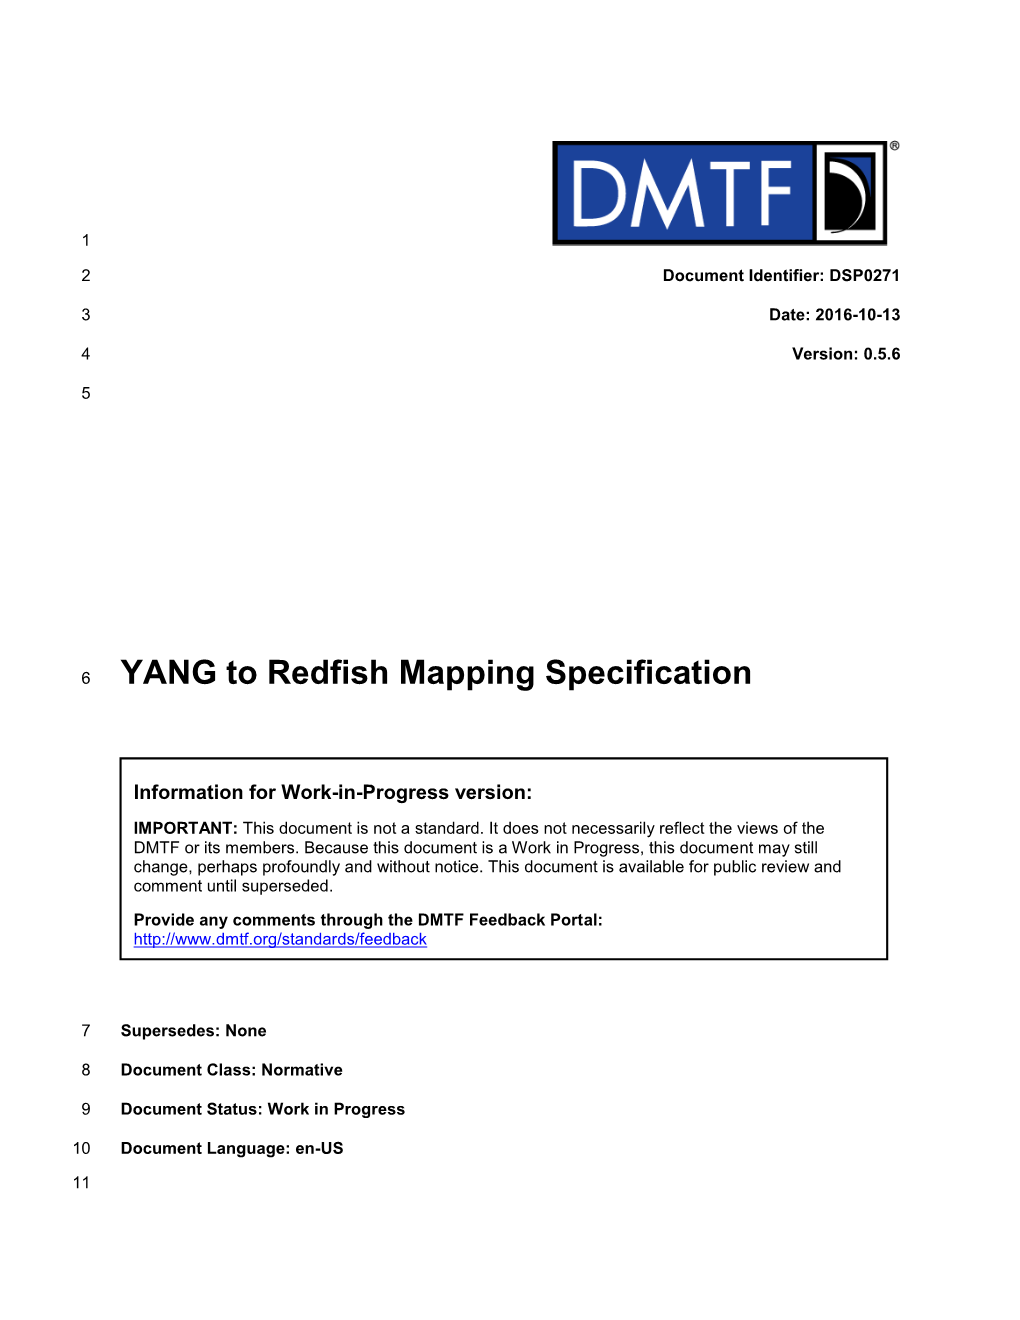 YANG to Redfish Mapping Specification